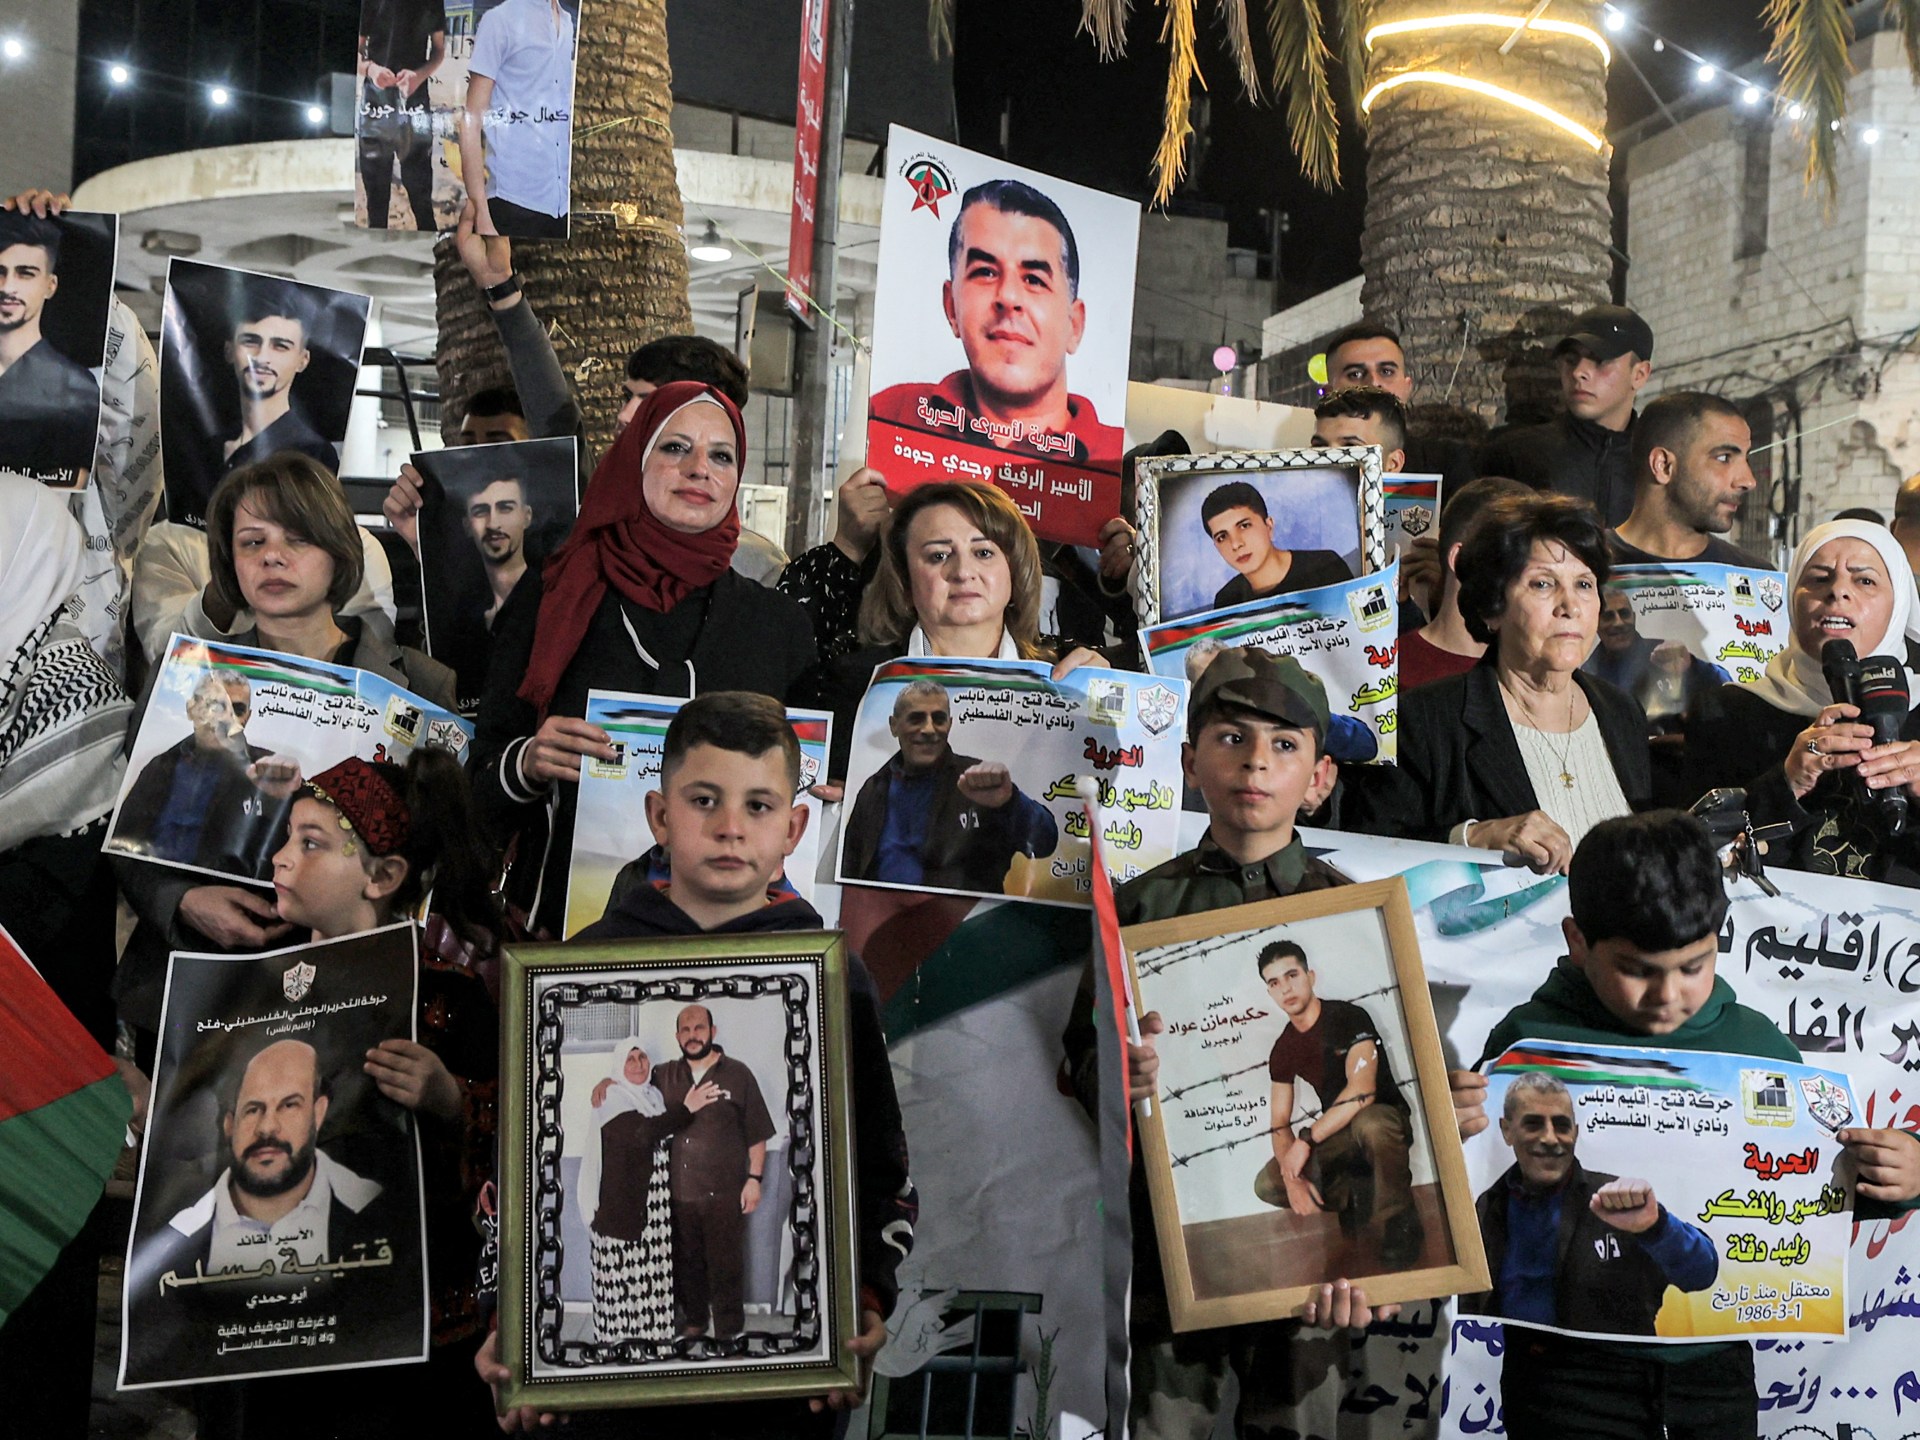 Why are so many Palestinian prisoners in Israeli jails?